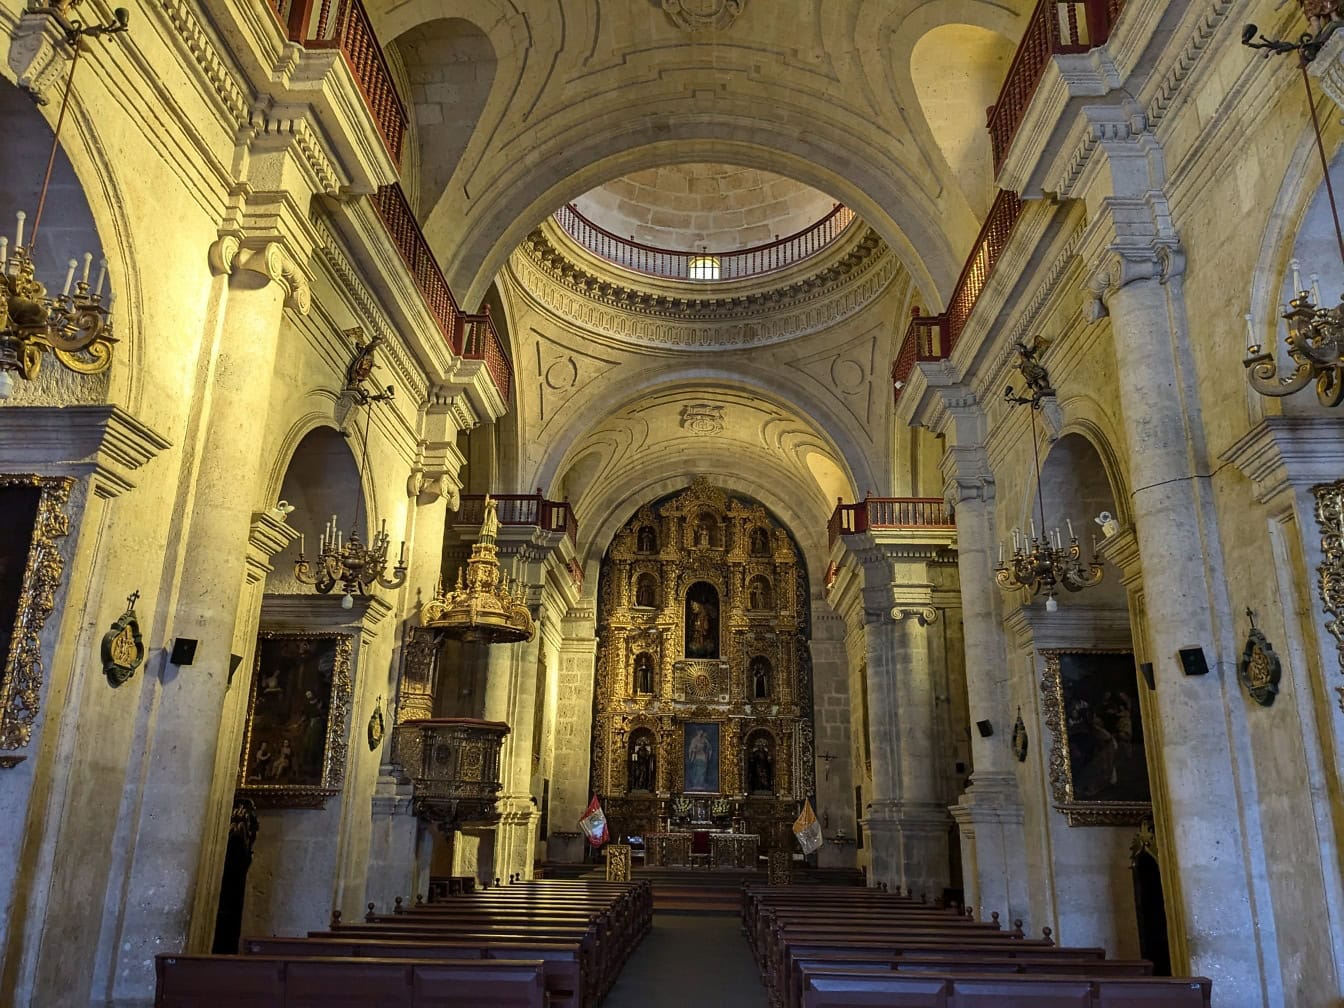 An interior in baroque-style  of catholic church of the the Society of Jesus of Arequipa in Peru with an ornate altar